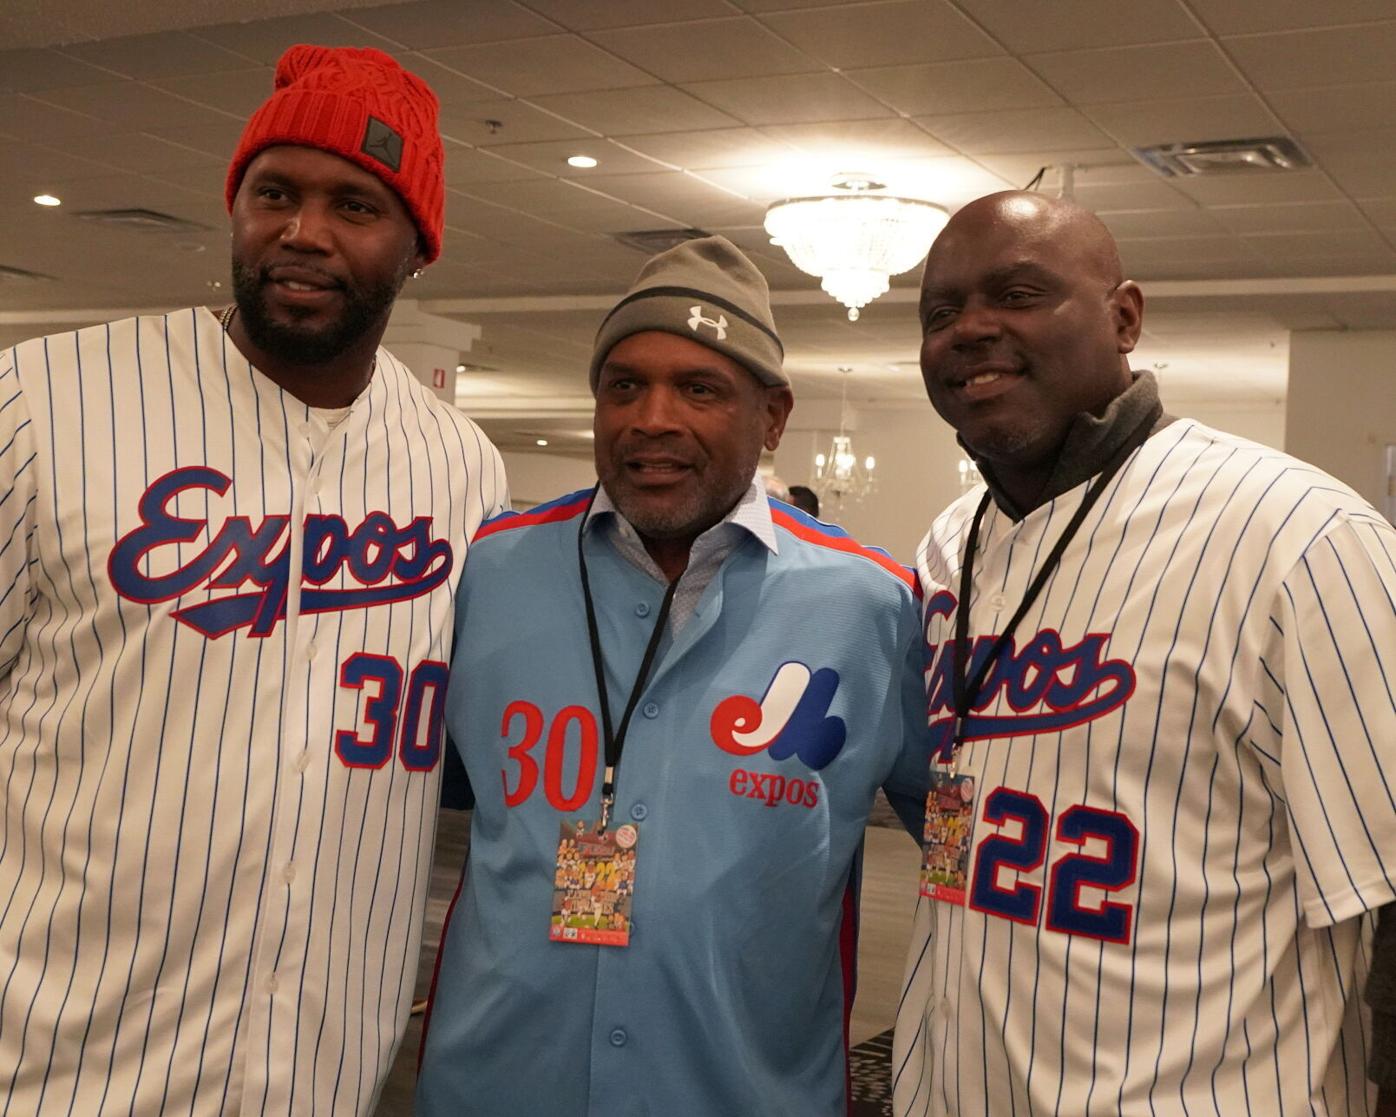 Expos Fest returns much to fans delight, Sports